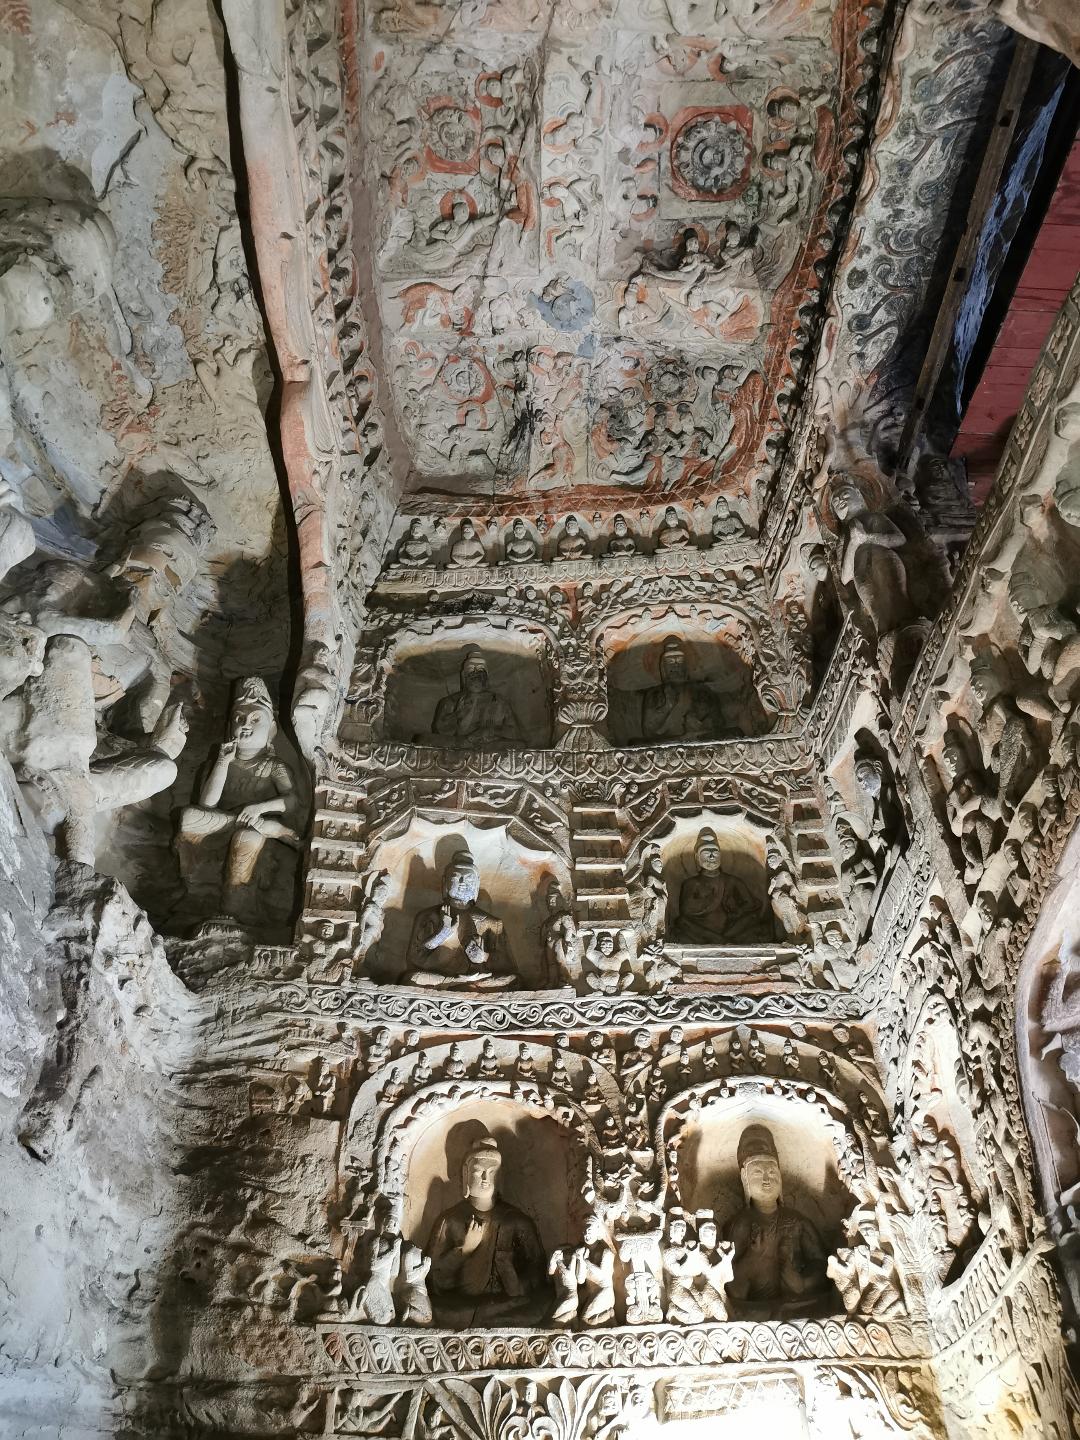 The statues in the Yungang Grottoes have lasted for thousands of years, and the Buddha's face will last forever.